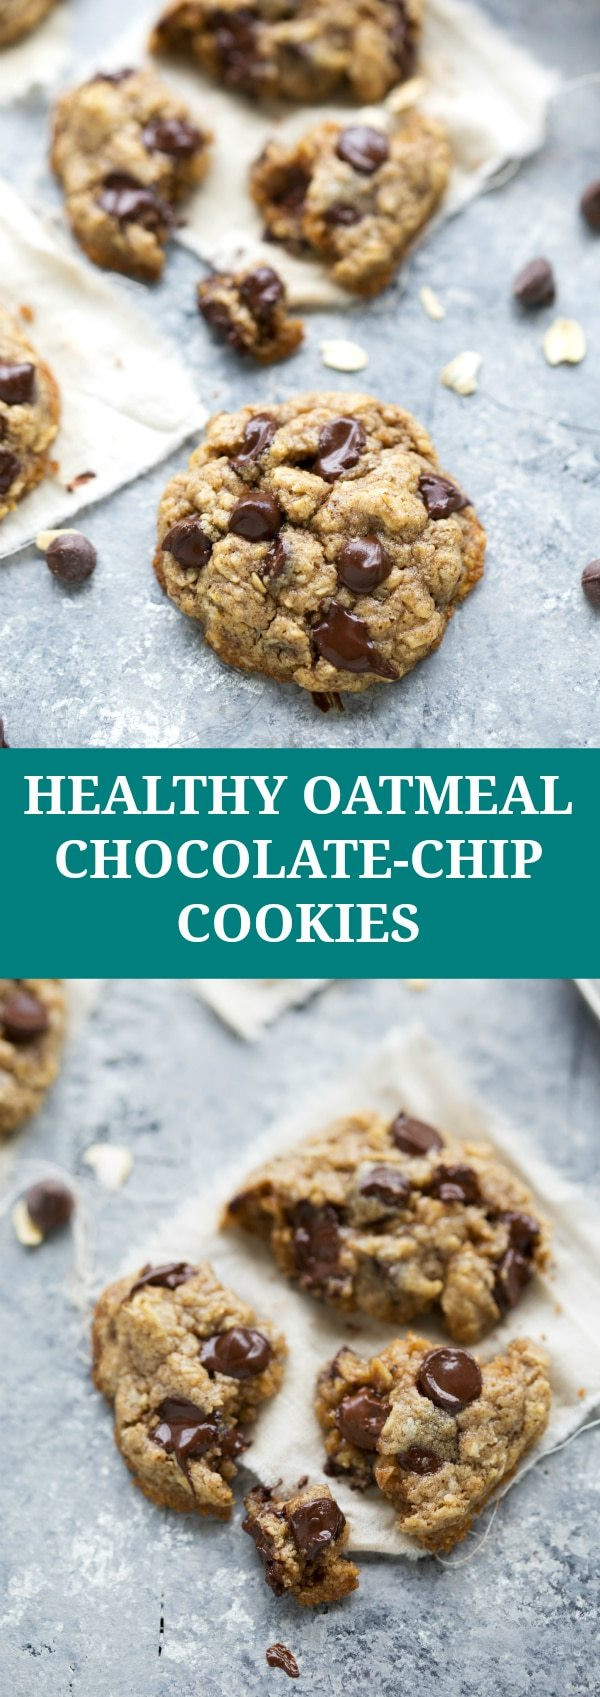 Chocolate Chip Cookies Recipe Healthy
 easy healthy oatmeal chocolate chip cookie recipe